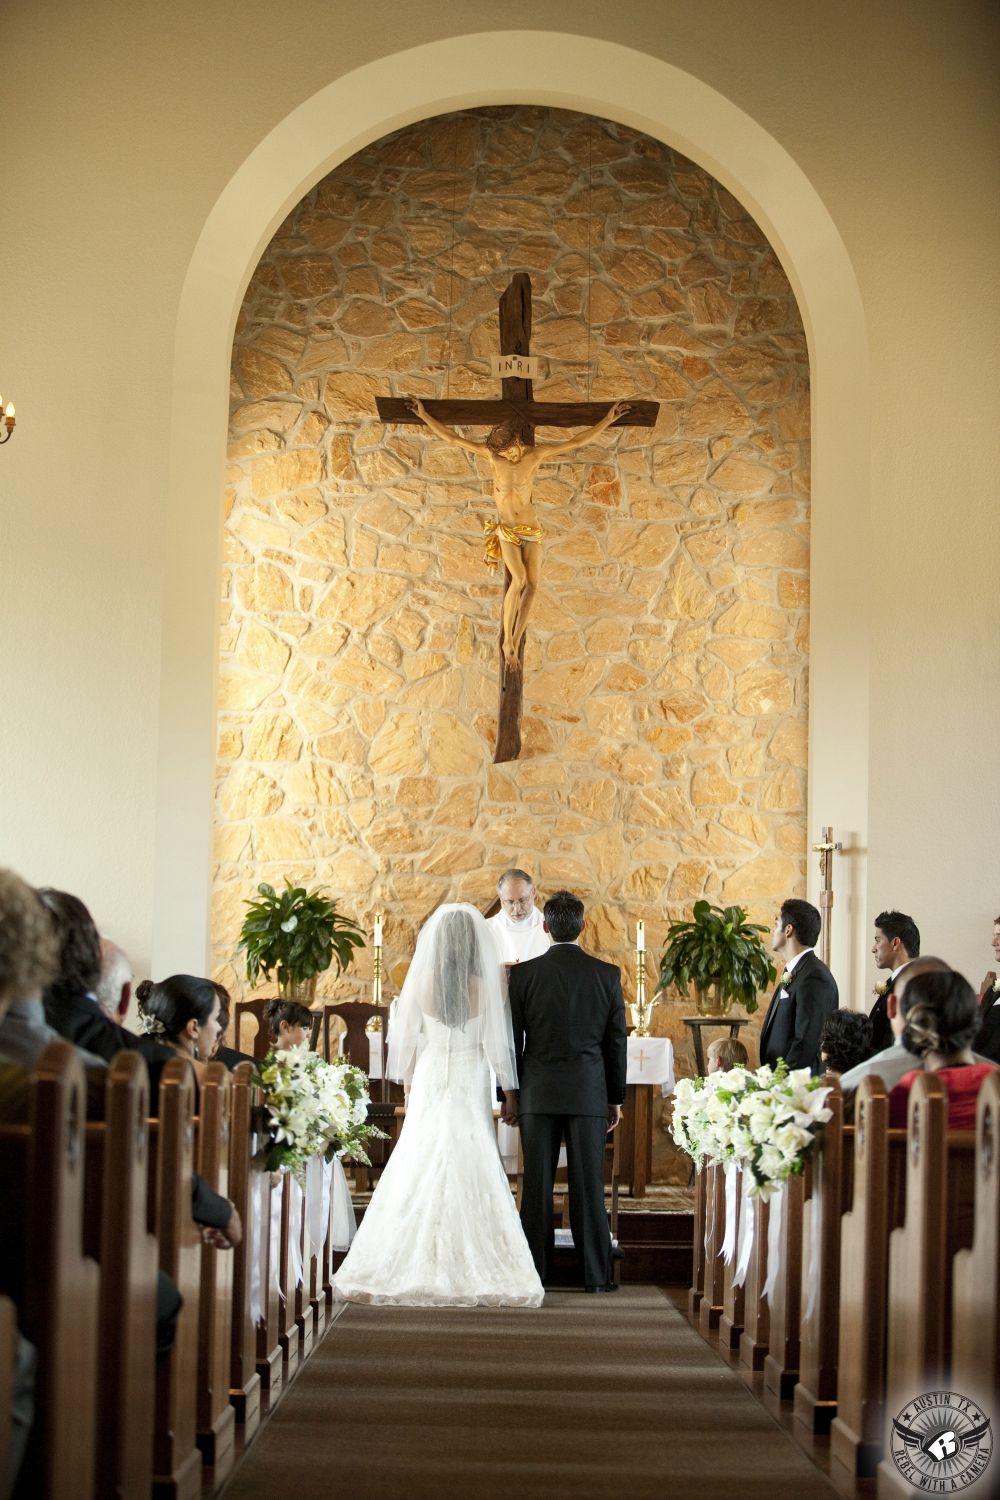 Austin wedding photography of bride and groom standing on the altar and saying their wedding views during Catholic wedding ceremony with priest at the Queen of Angels Chapel in Spicewood, Texas.